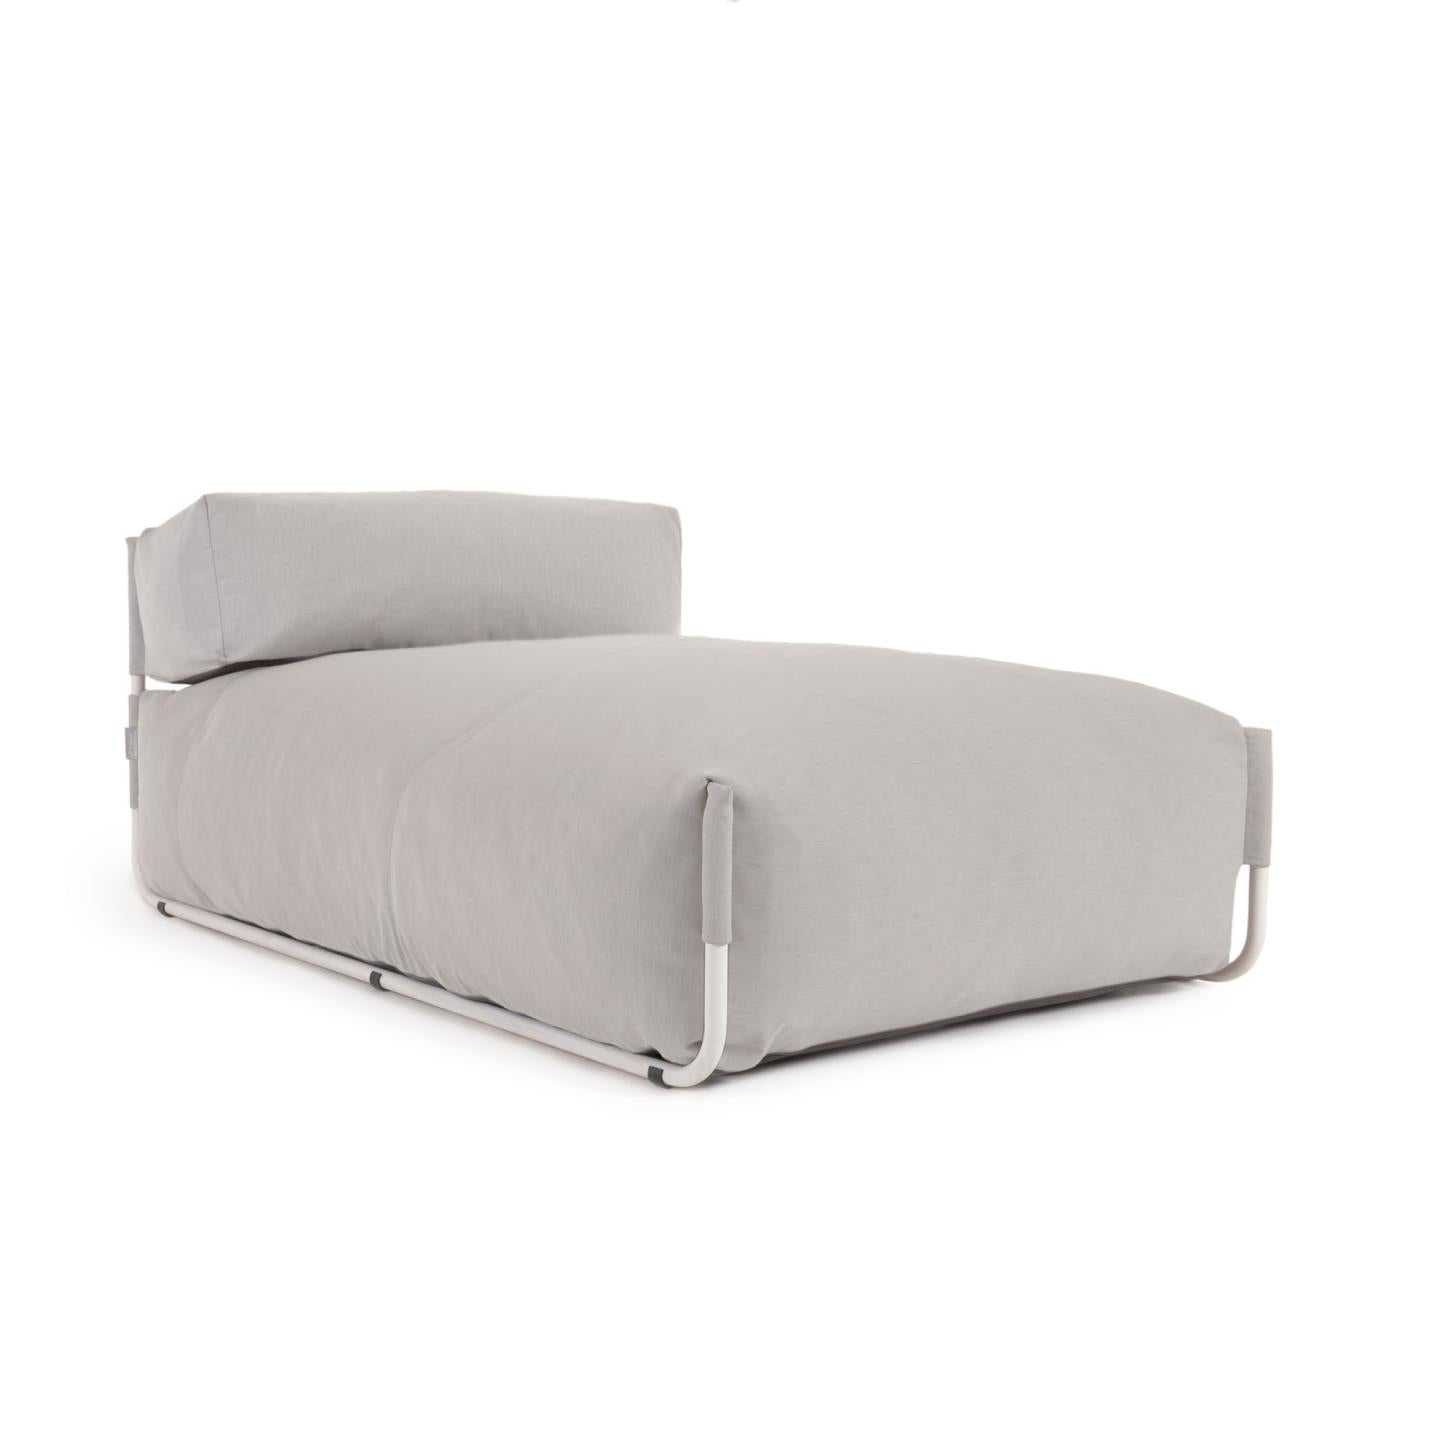 Square chaise longue pouffe with backrest in light grey with white aluminium, 165 x 101 cm